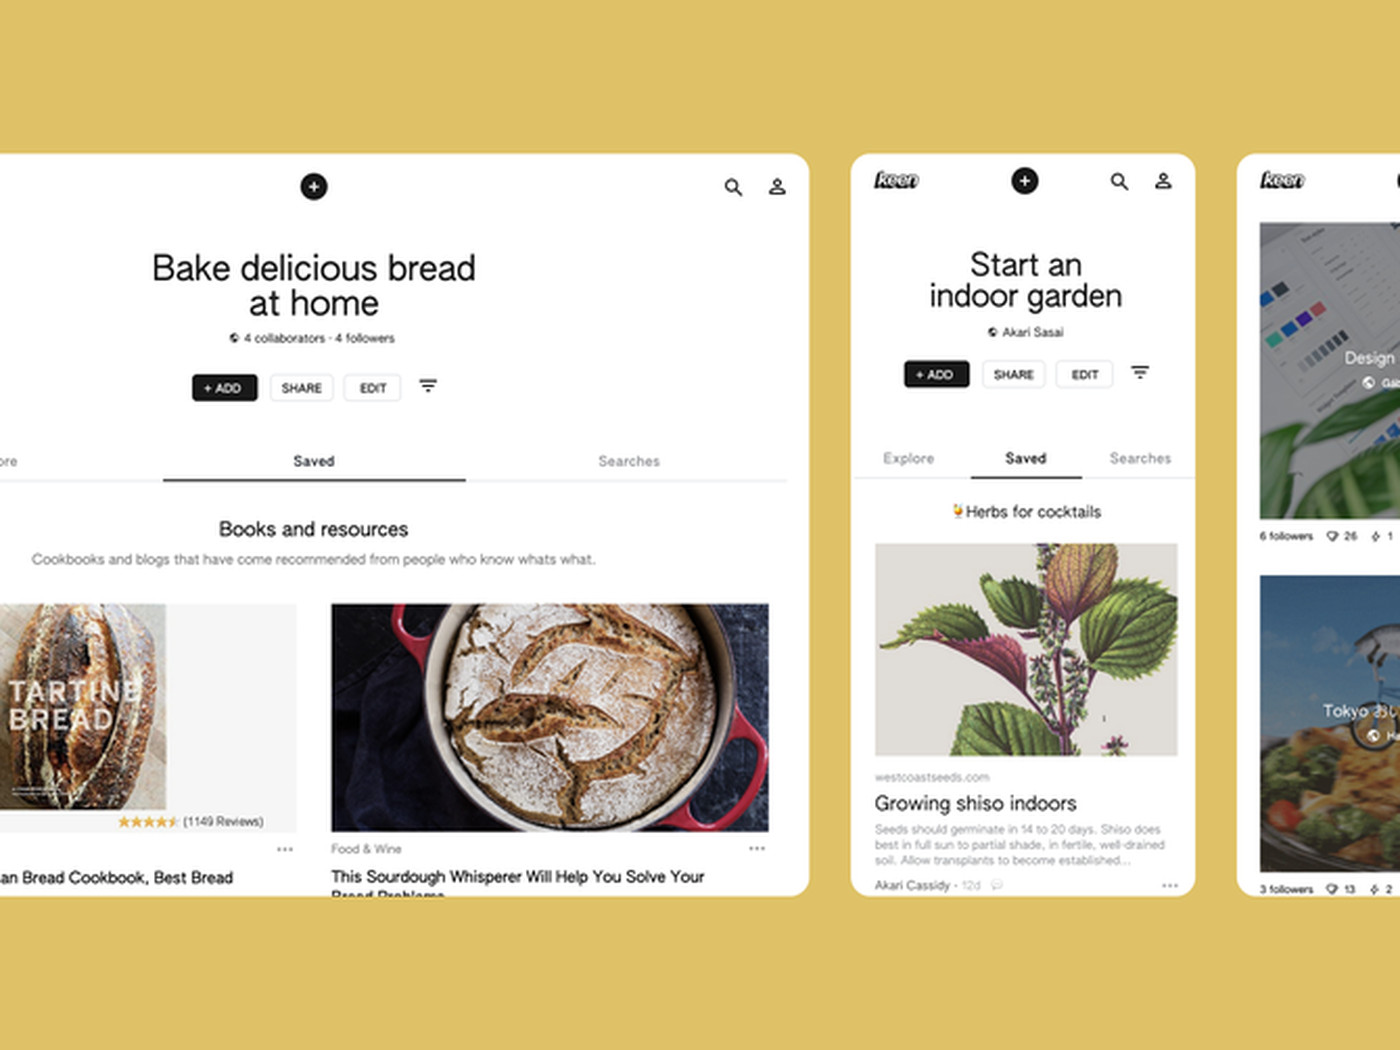 Google quietly launches an AI-powered Pinterest rival named Keen - The Verge